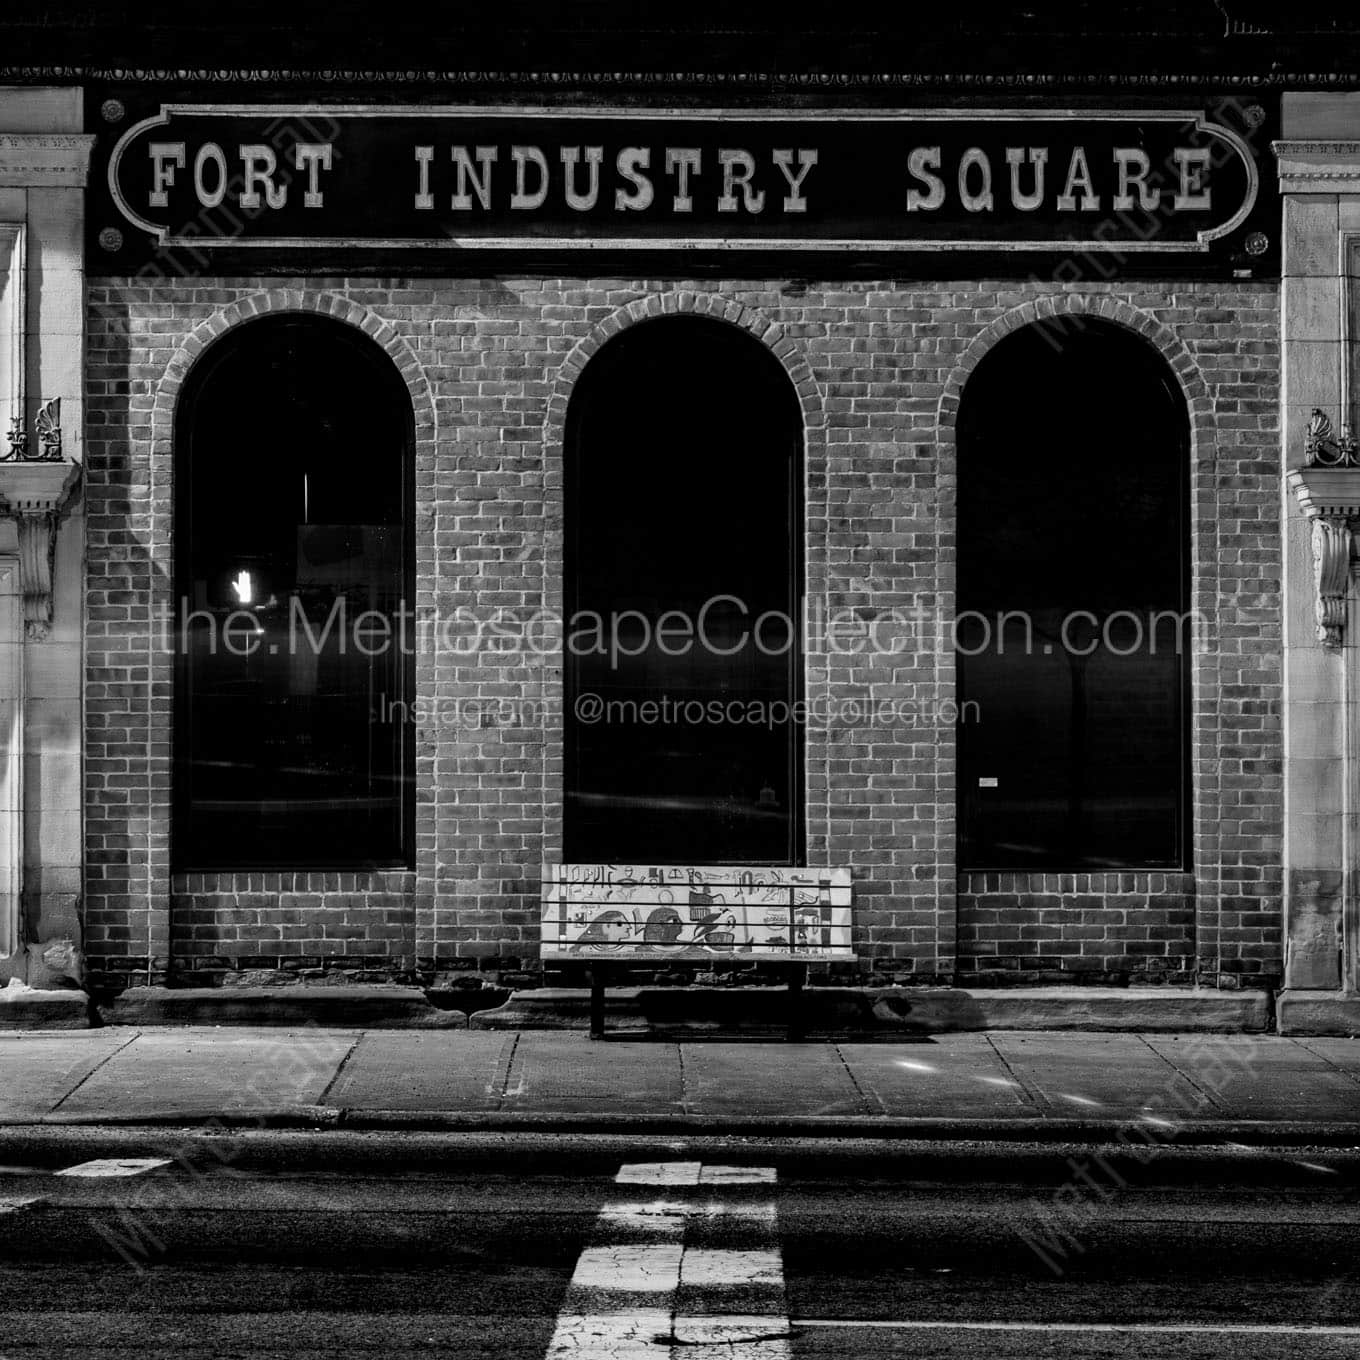 fort industry square at night Black & White Office Art